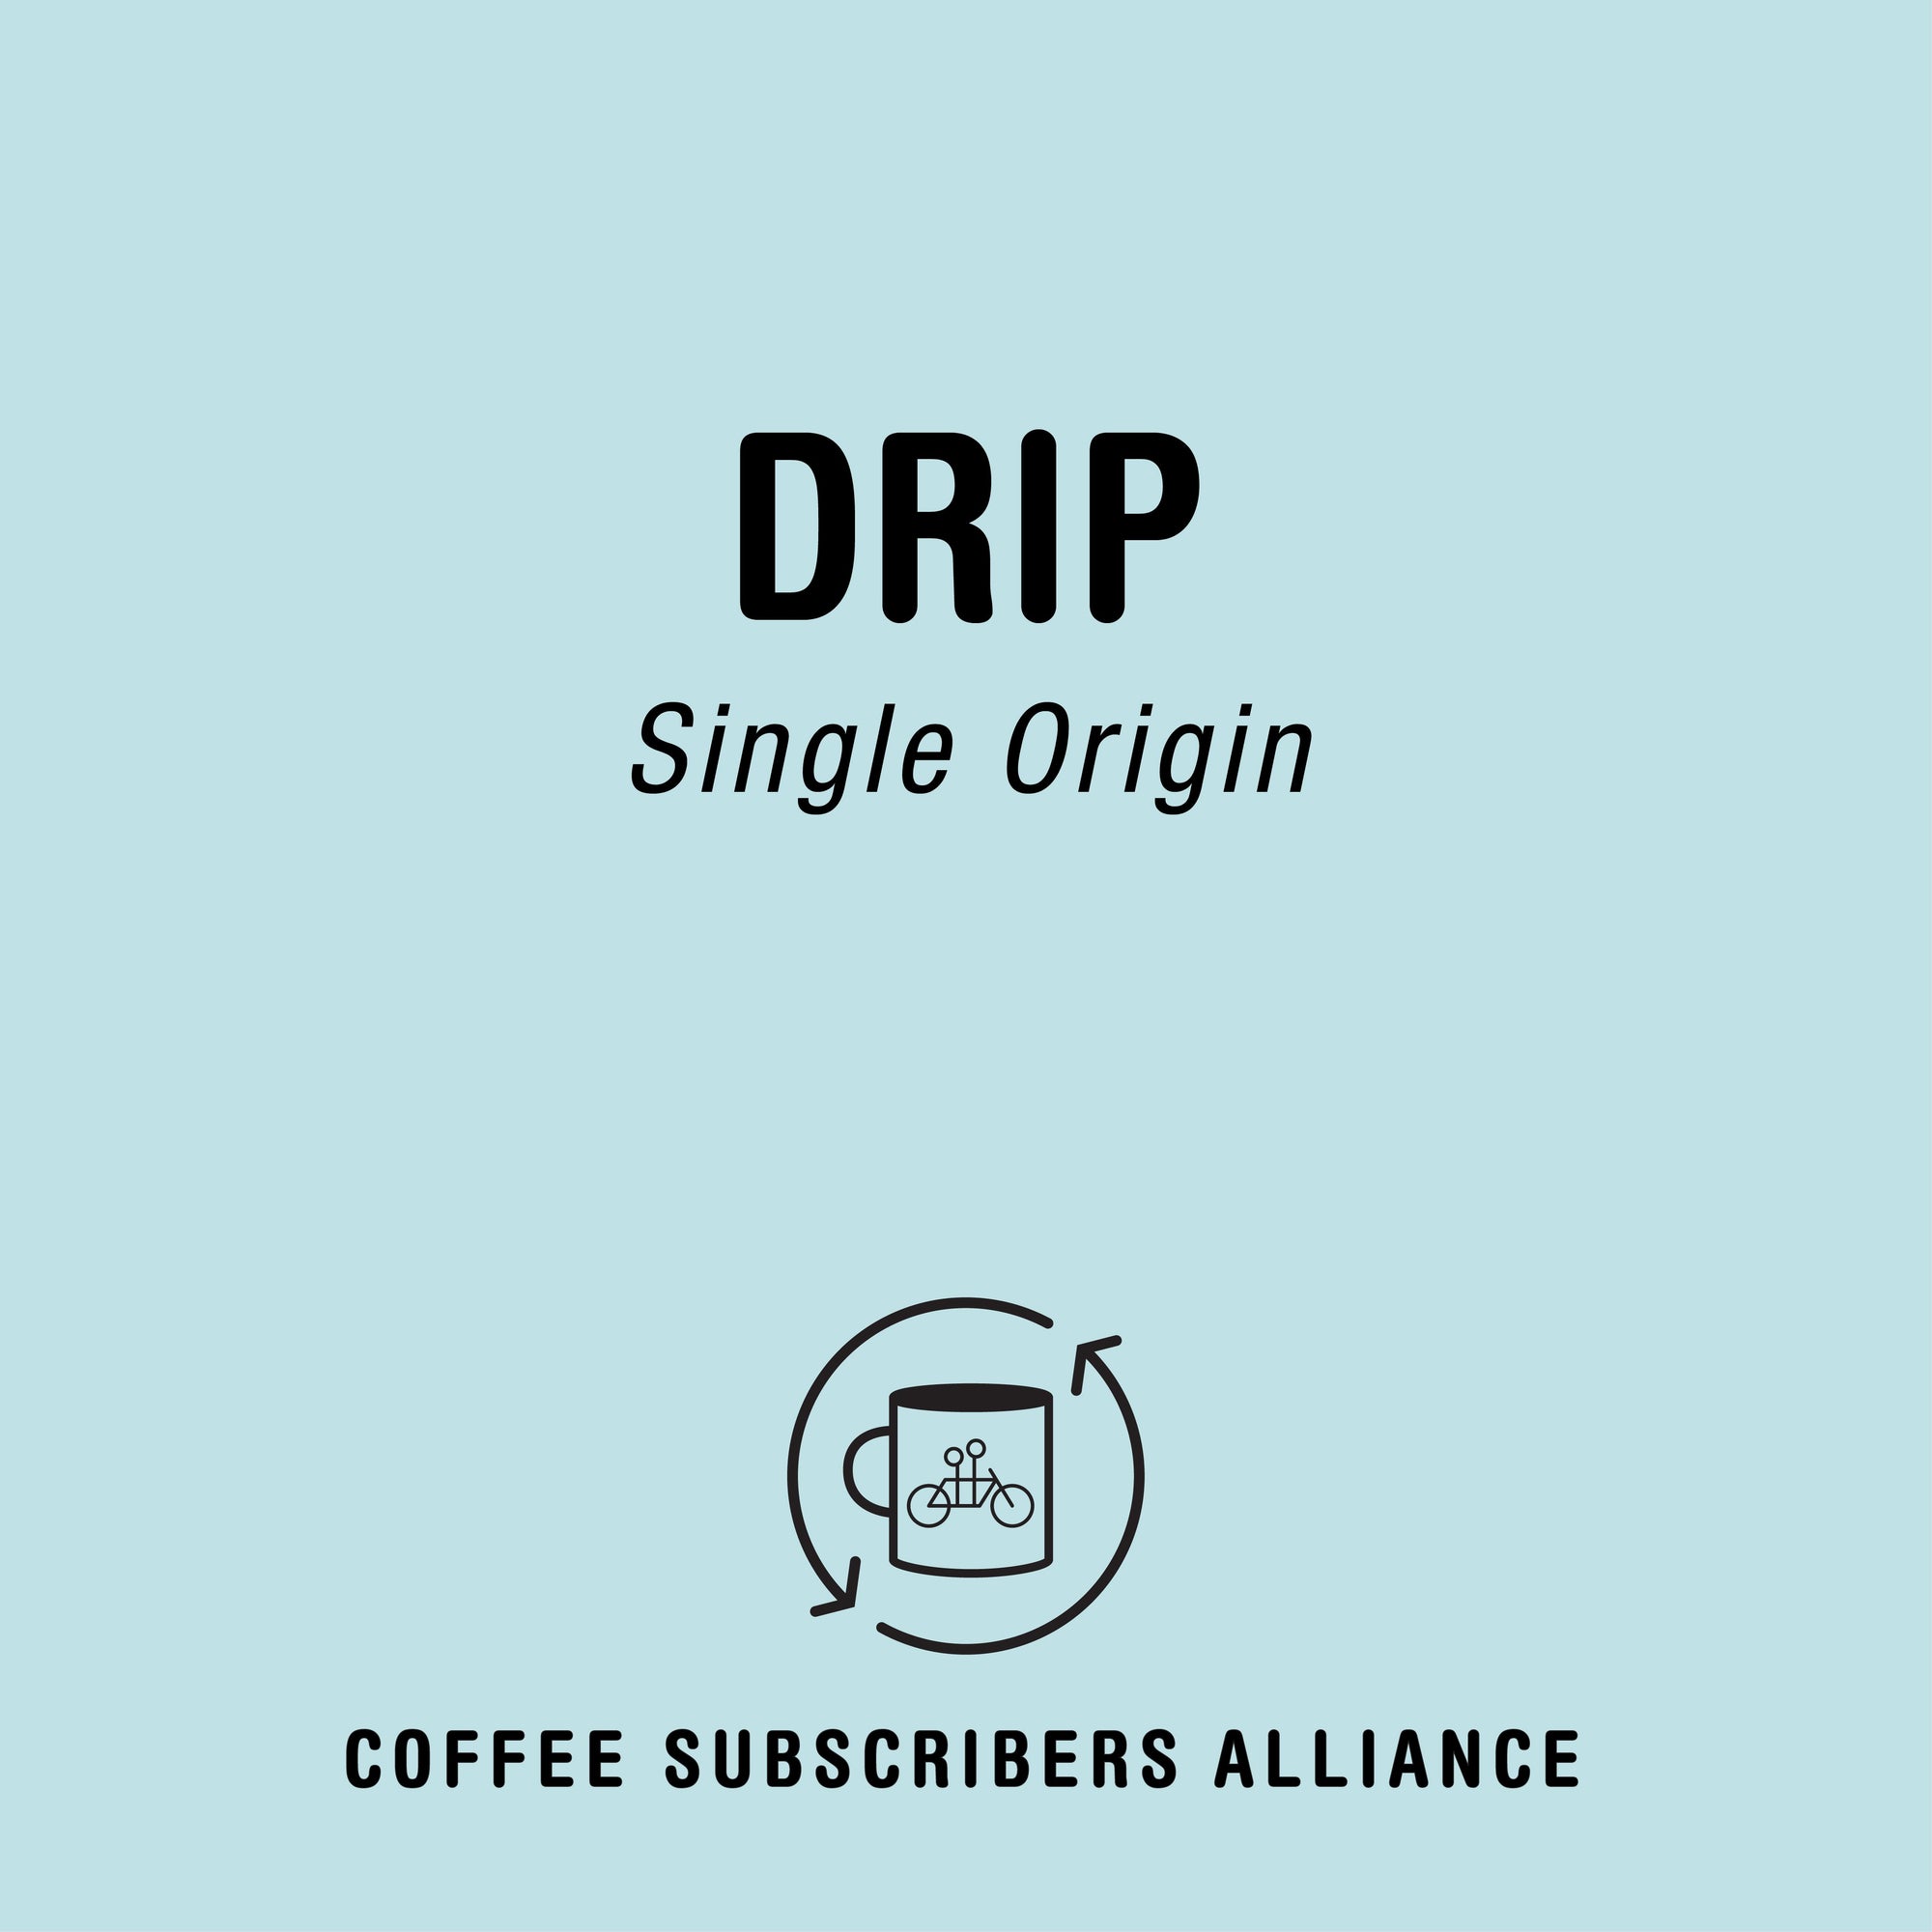 Logo of "Tandem Drip Subscription Gift - 8 Weeks x 6" featuring the text "single origin" and a circular emblem with a stylized coffee cup icon on a pale blue background.